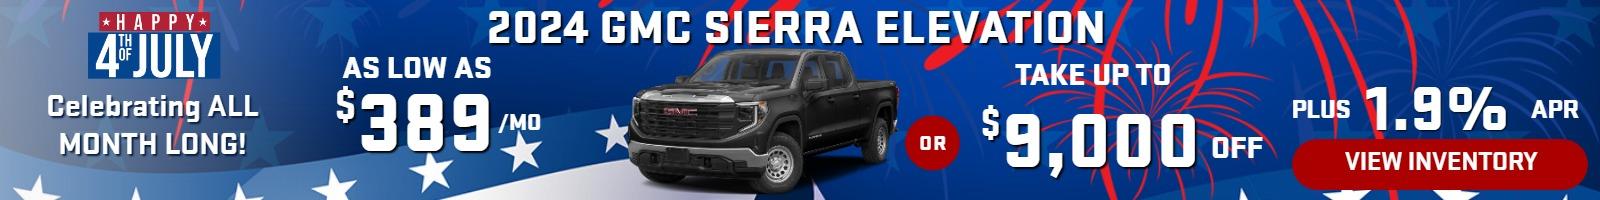 2024 sierra elevation
Stock GA3722

take up to 
$9000 OFF
  PLUS                  
 1.9 % finance

OR  

AS LOW AS 
$389/mo